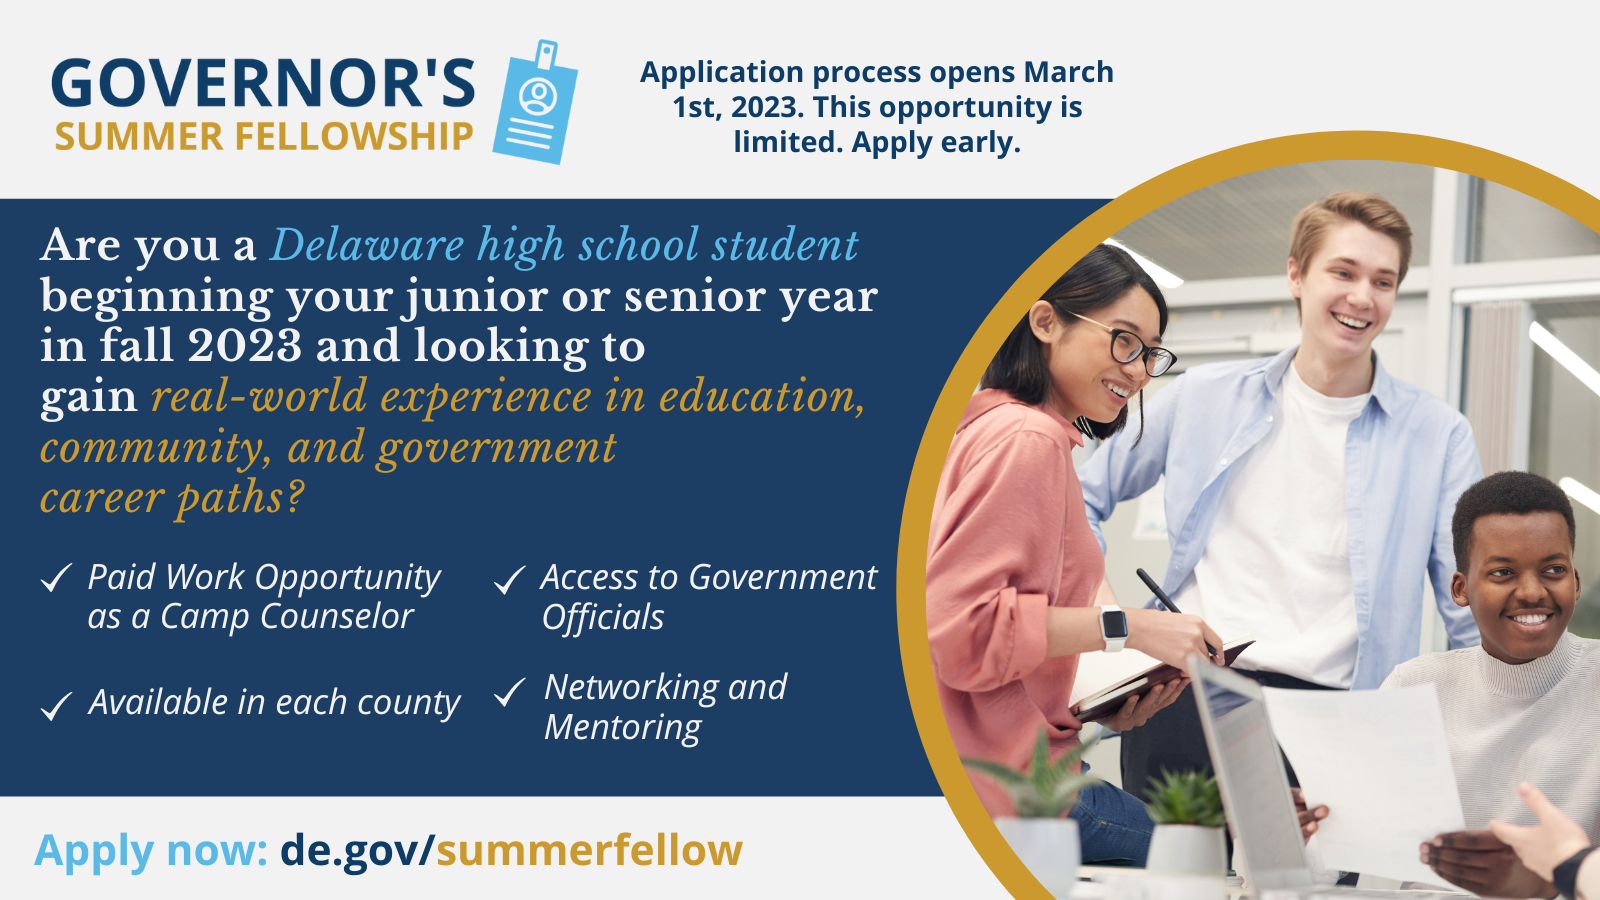 Apply for the Governor's Summer Fellowship